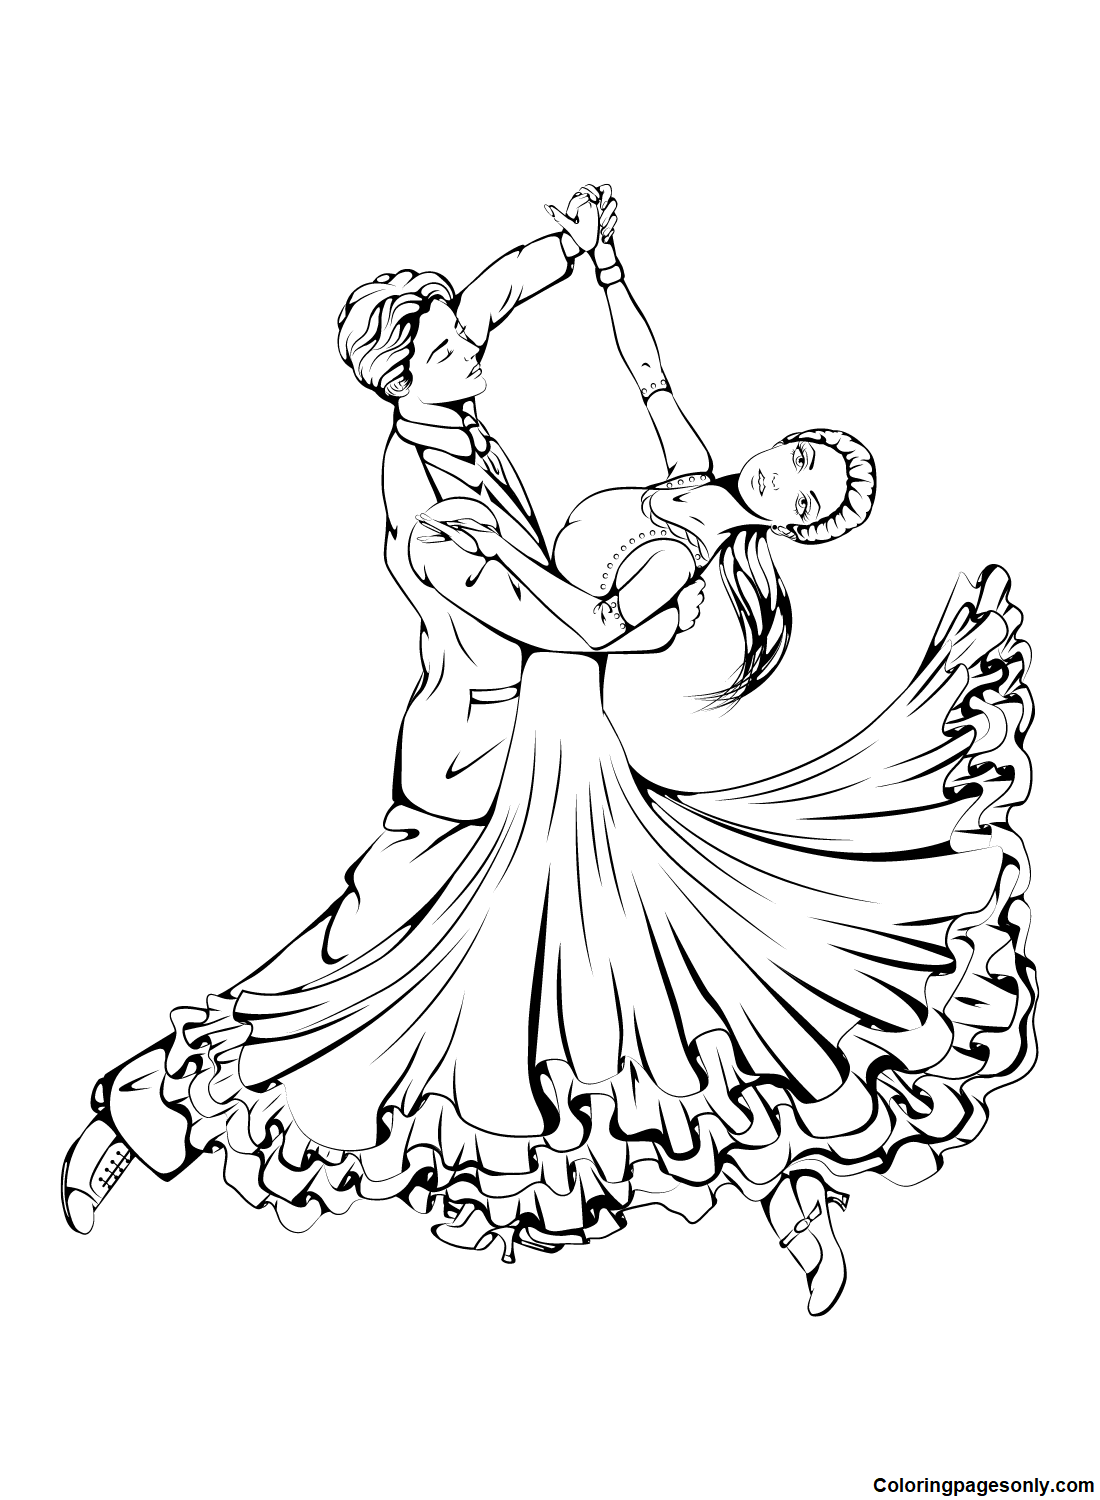 Dancing coloring pages printable for free download